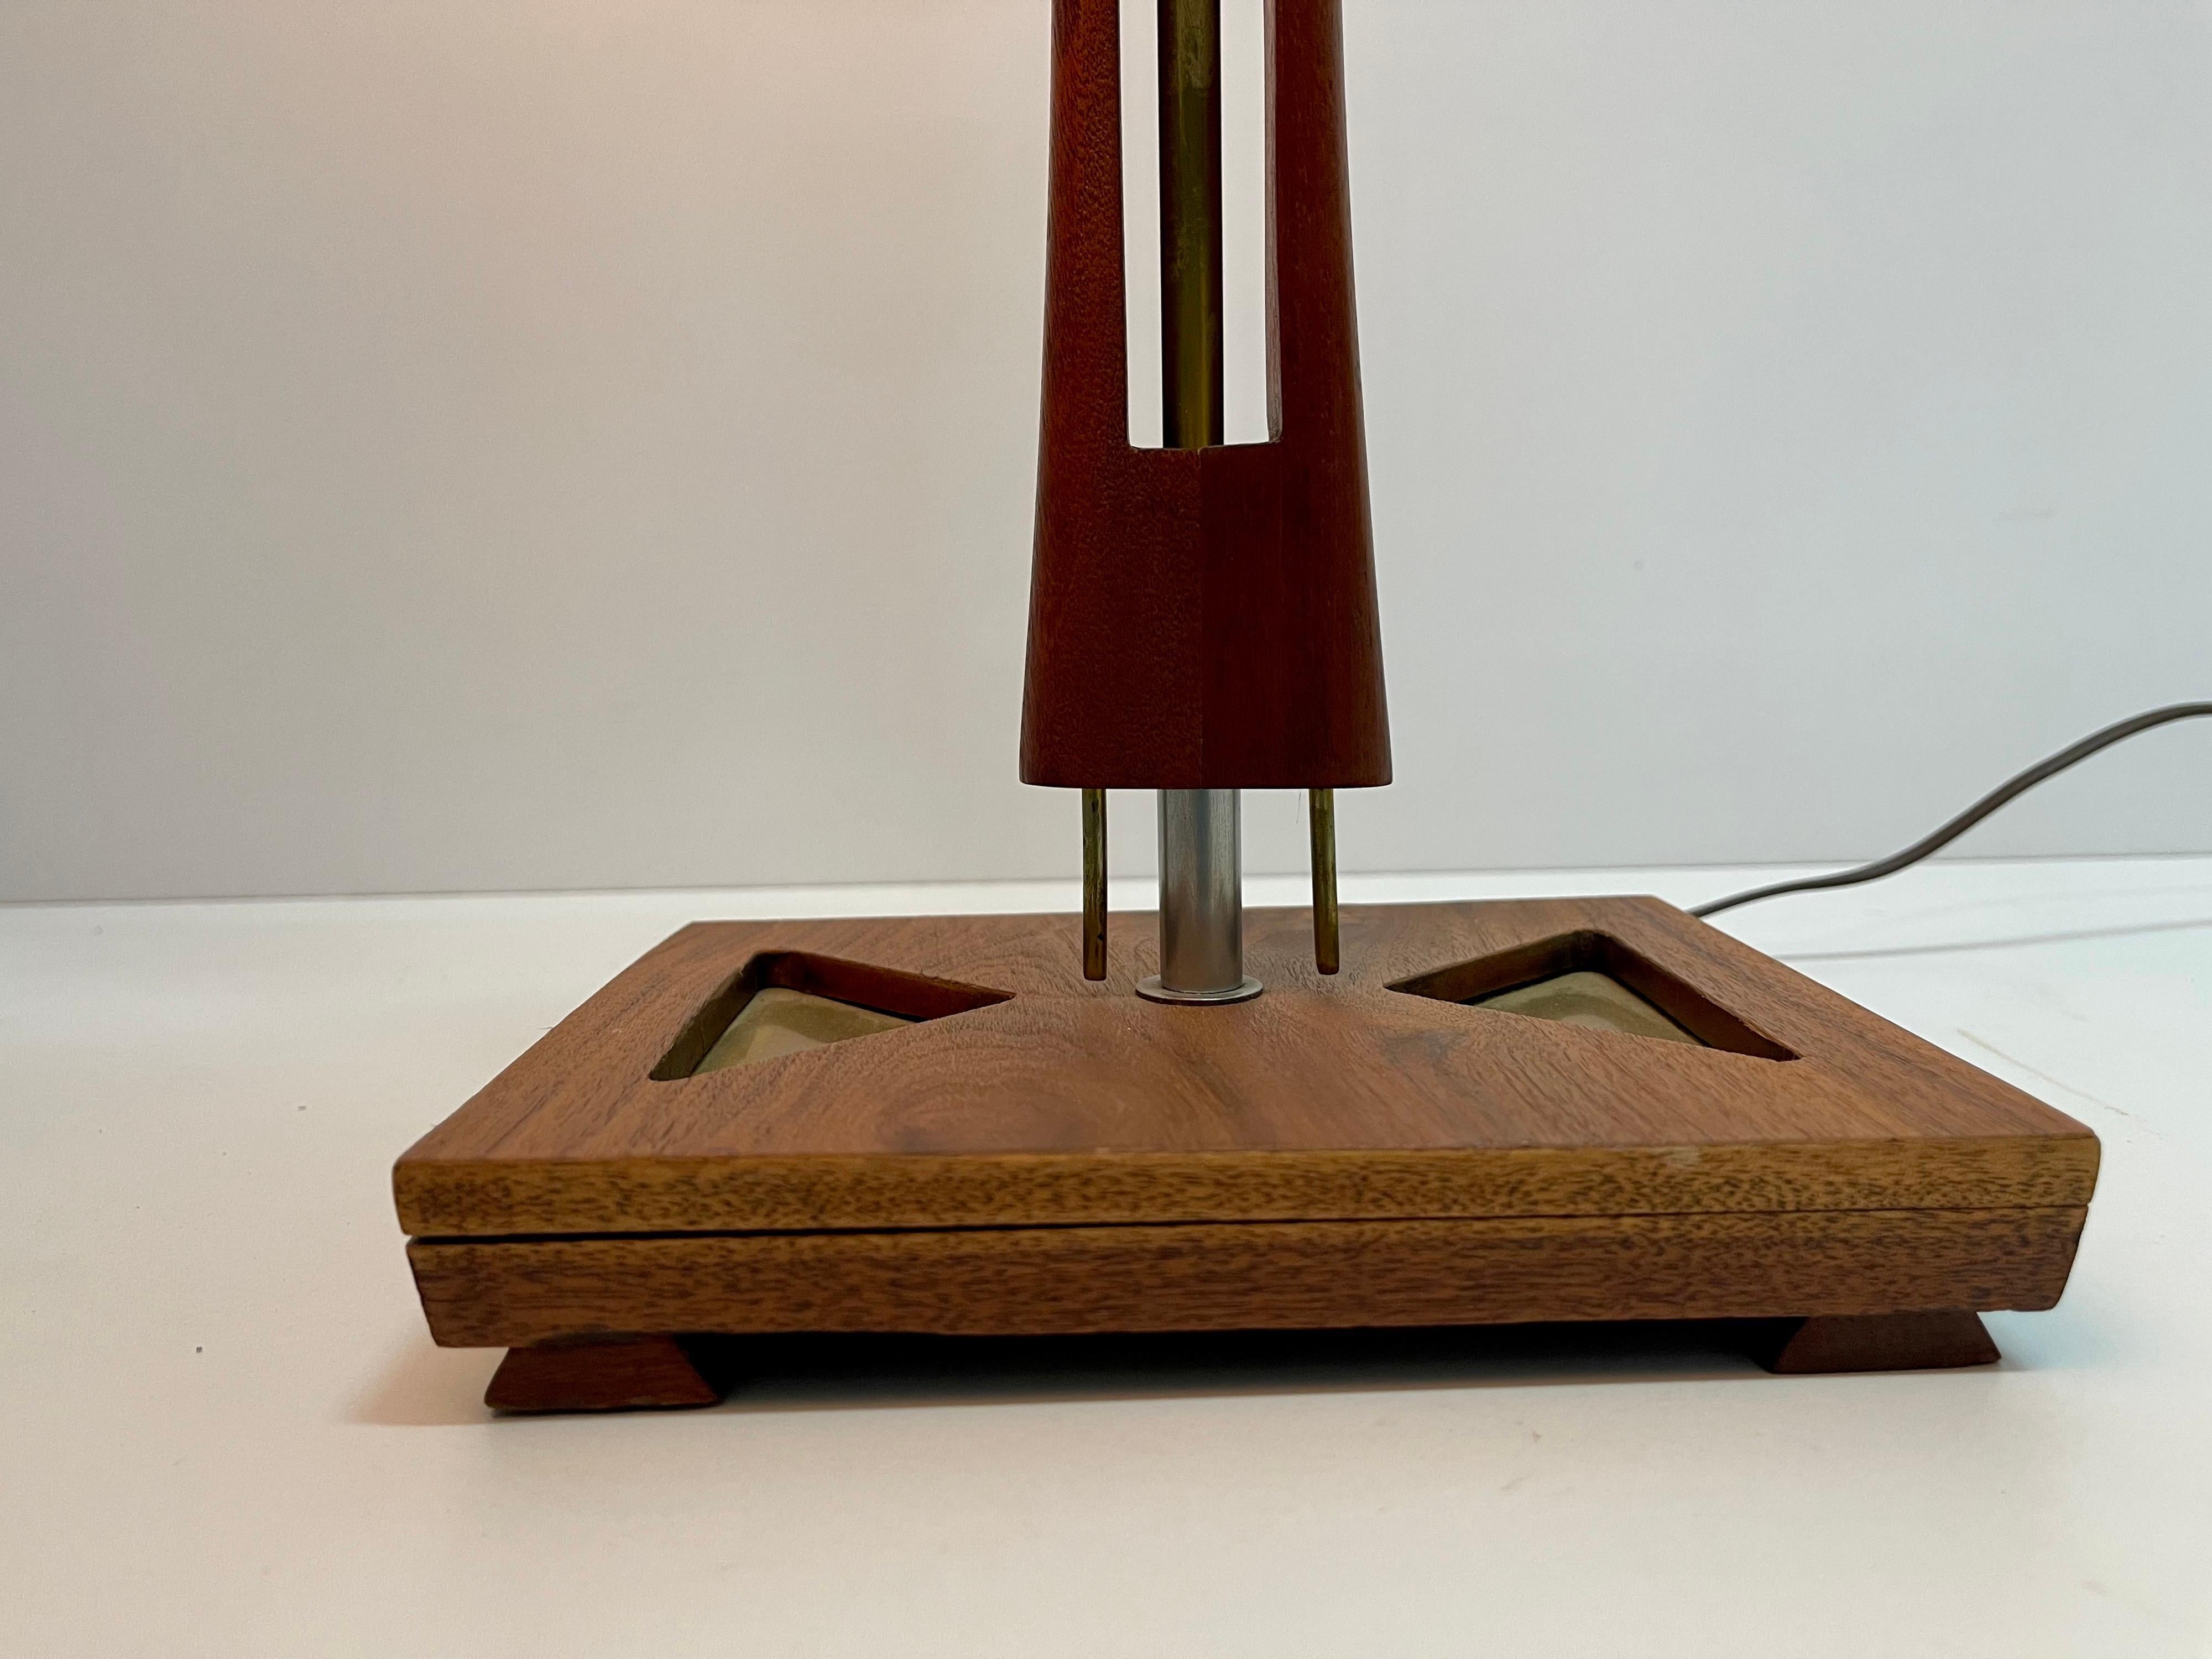 Mexican Mid-Century Modern Table Lamp by Muebles Toluxsena, Mexico 1960 For Sale